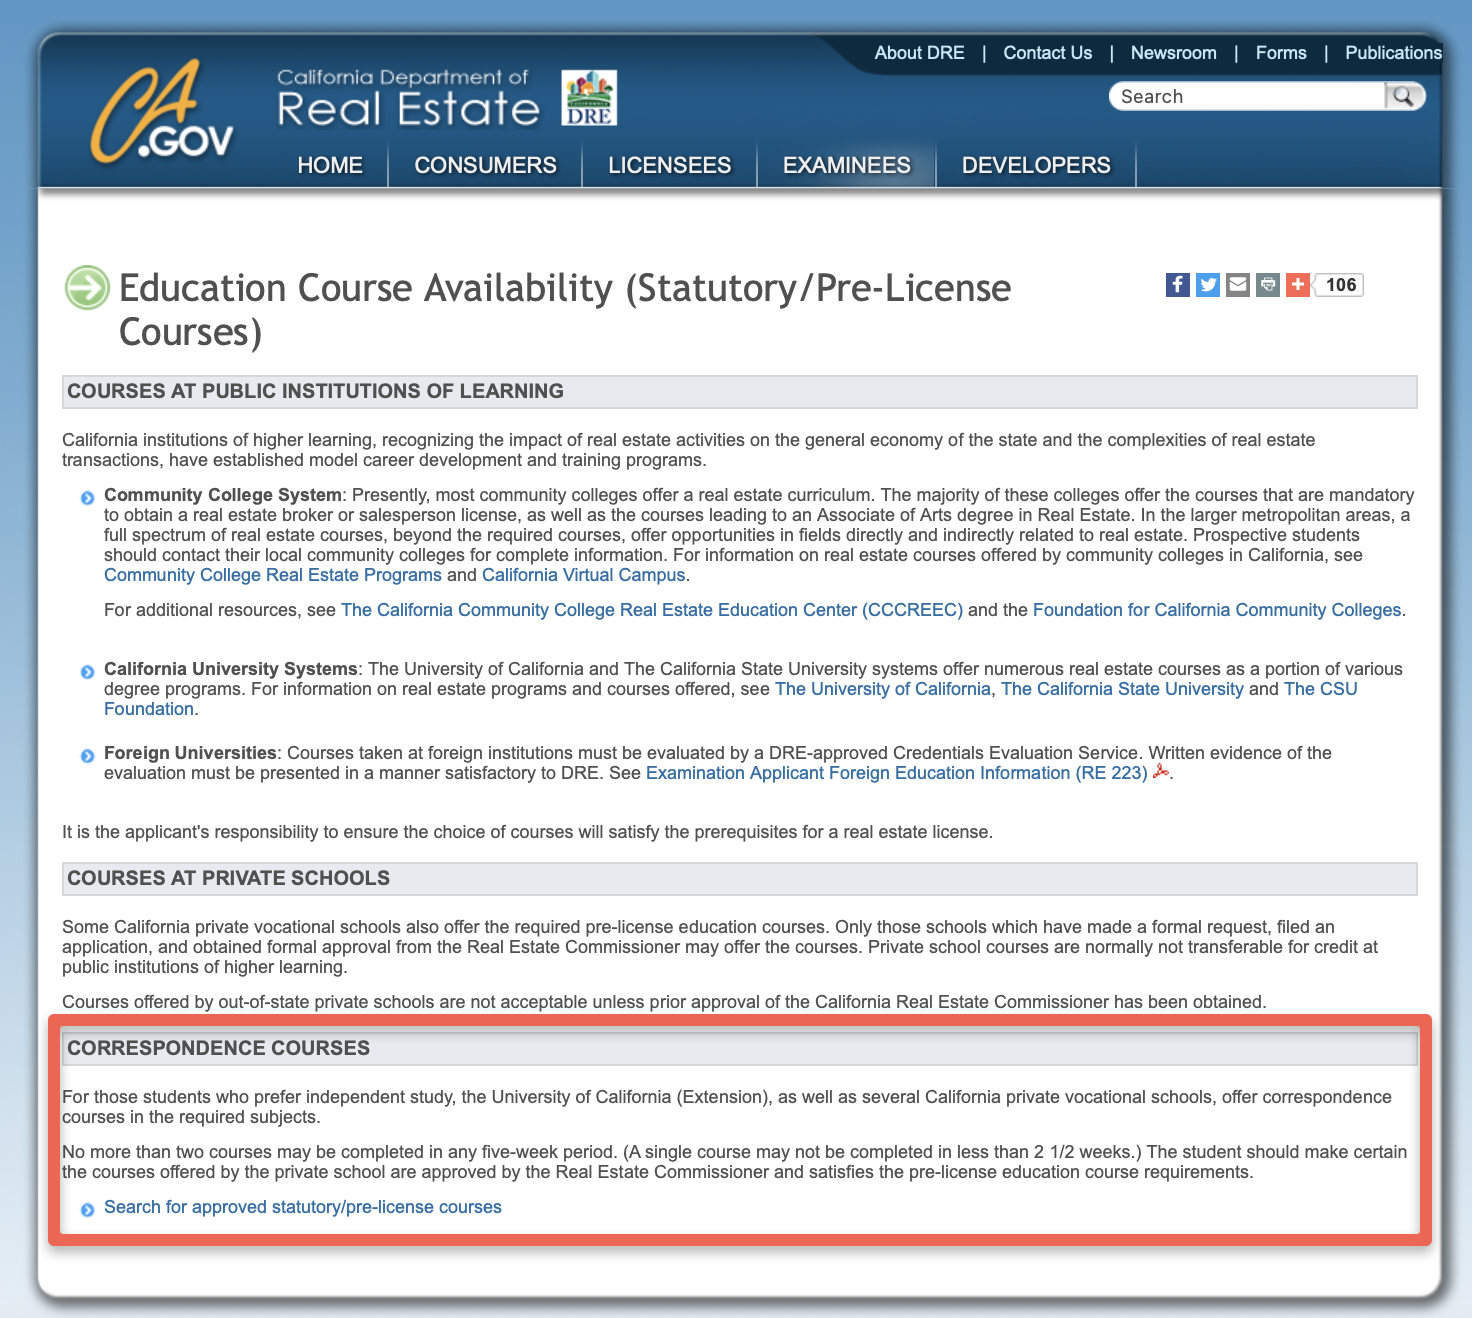 California Real Estate License mandatory completion time example of 2.5 weeks per course as shown on the CA DRE website.